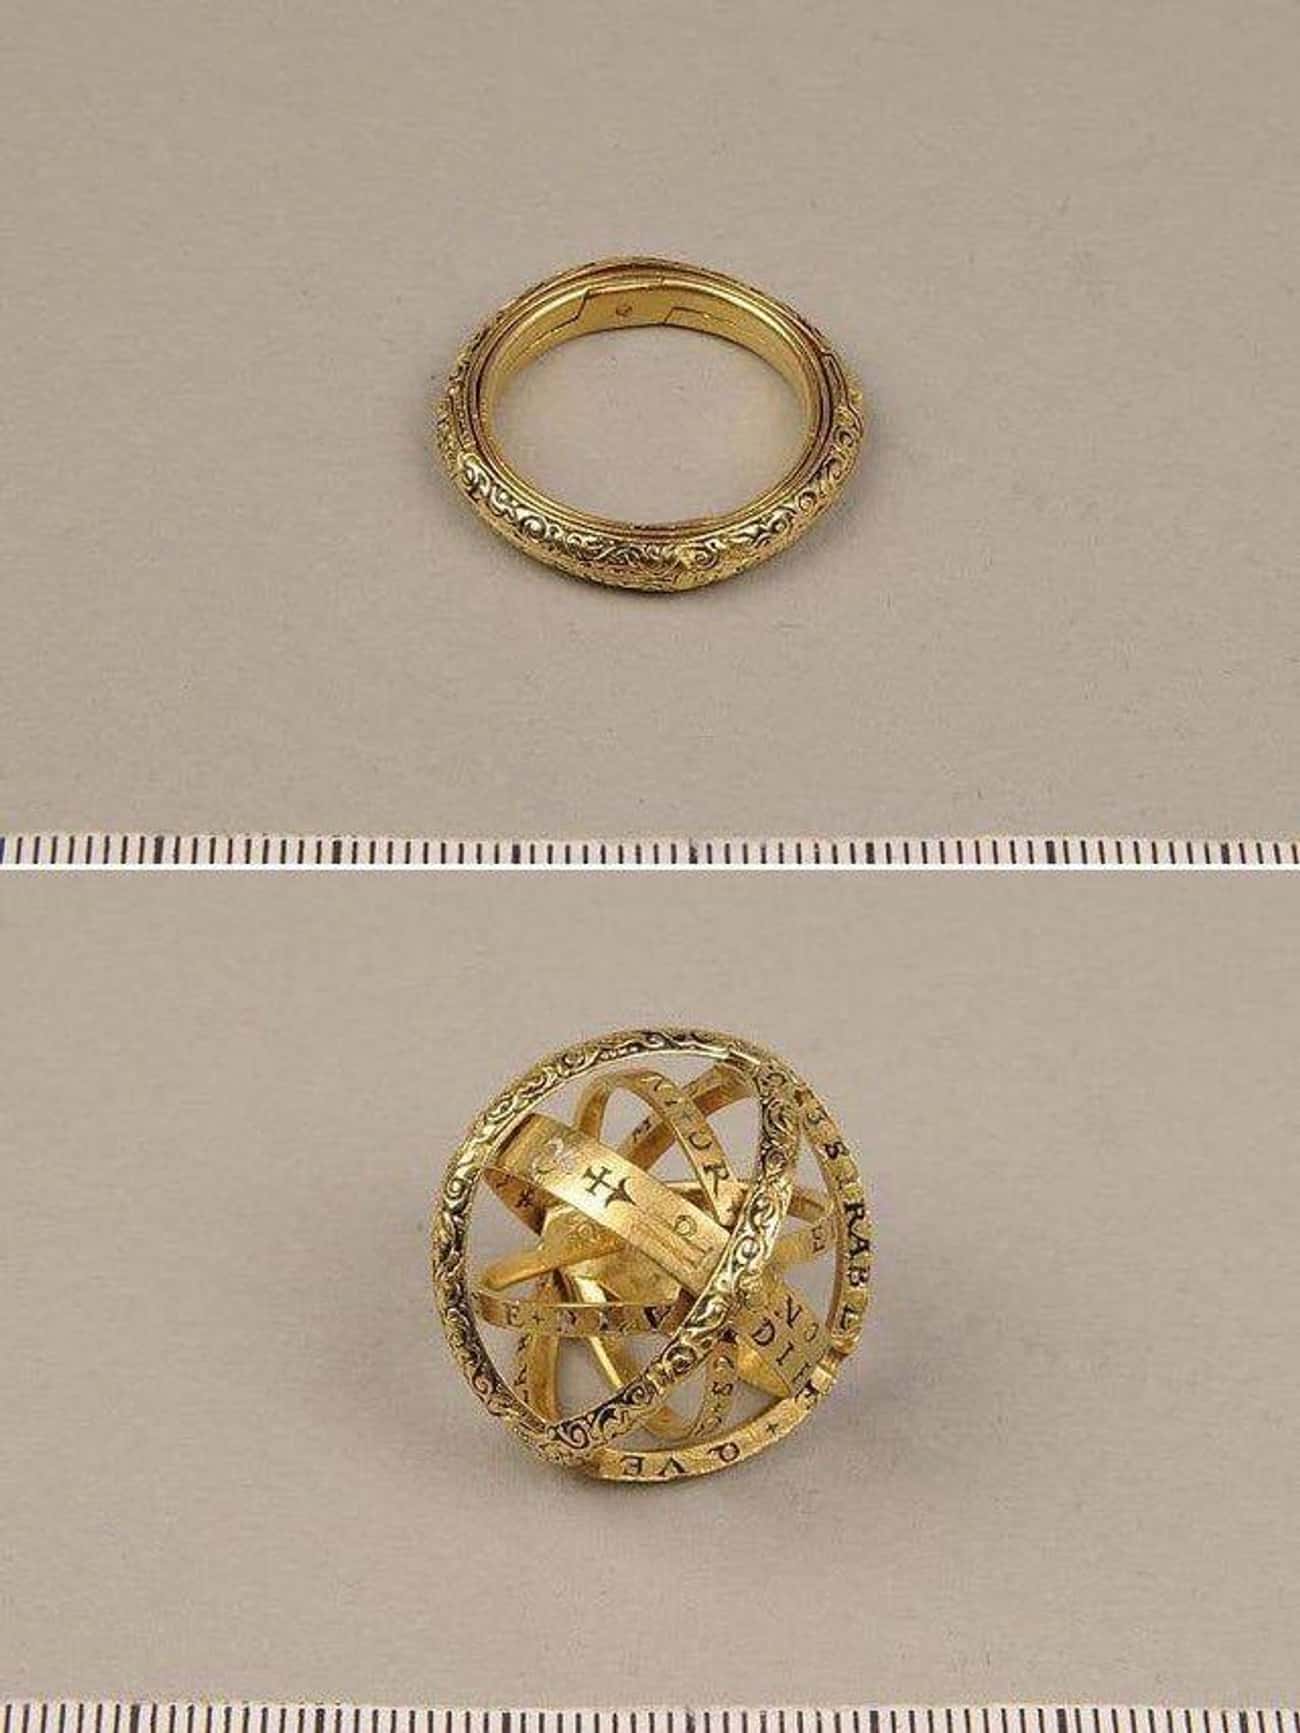 16th Century Ring That Unfolds Into An Astronomical Sphere